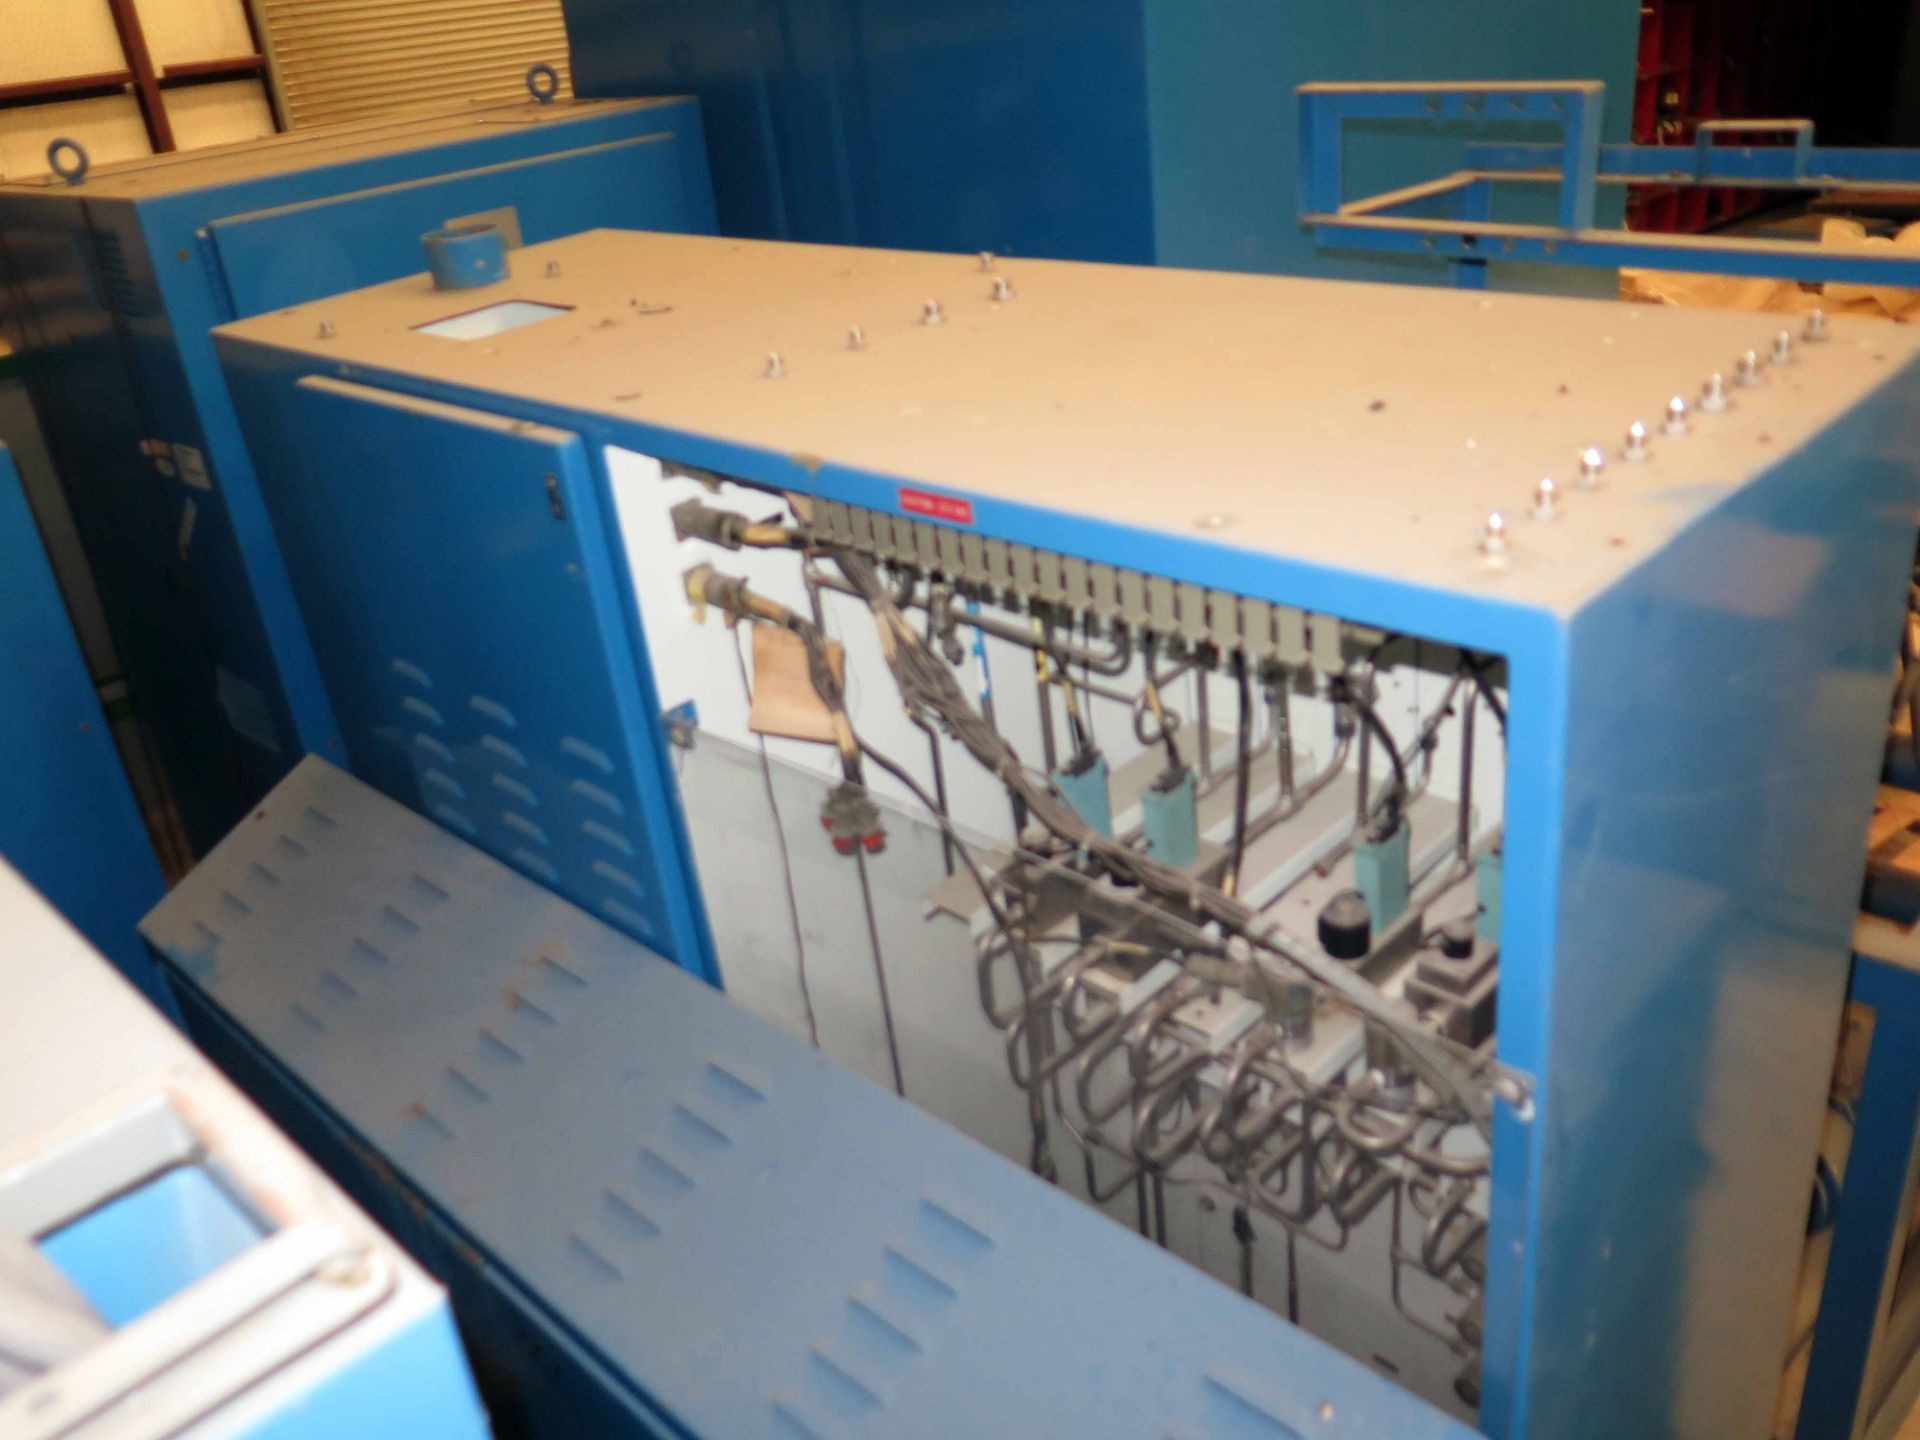 FLUORIDE ION CLEANING SYSTEM, TR COATING INC, including (2) 60 KVA & (1) 120 KVA pwr. supplies, - Image 9 of 26